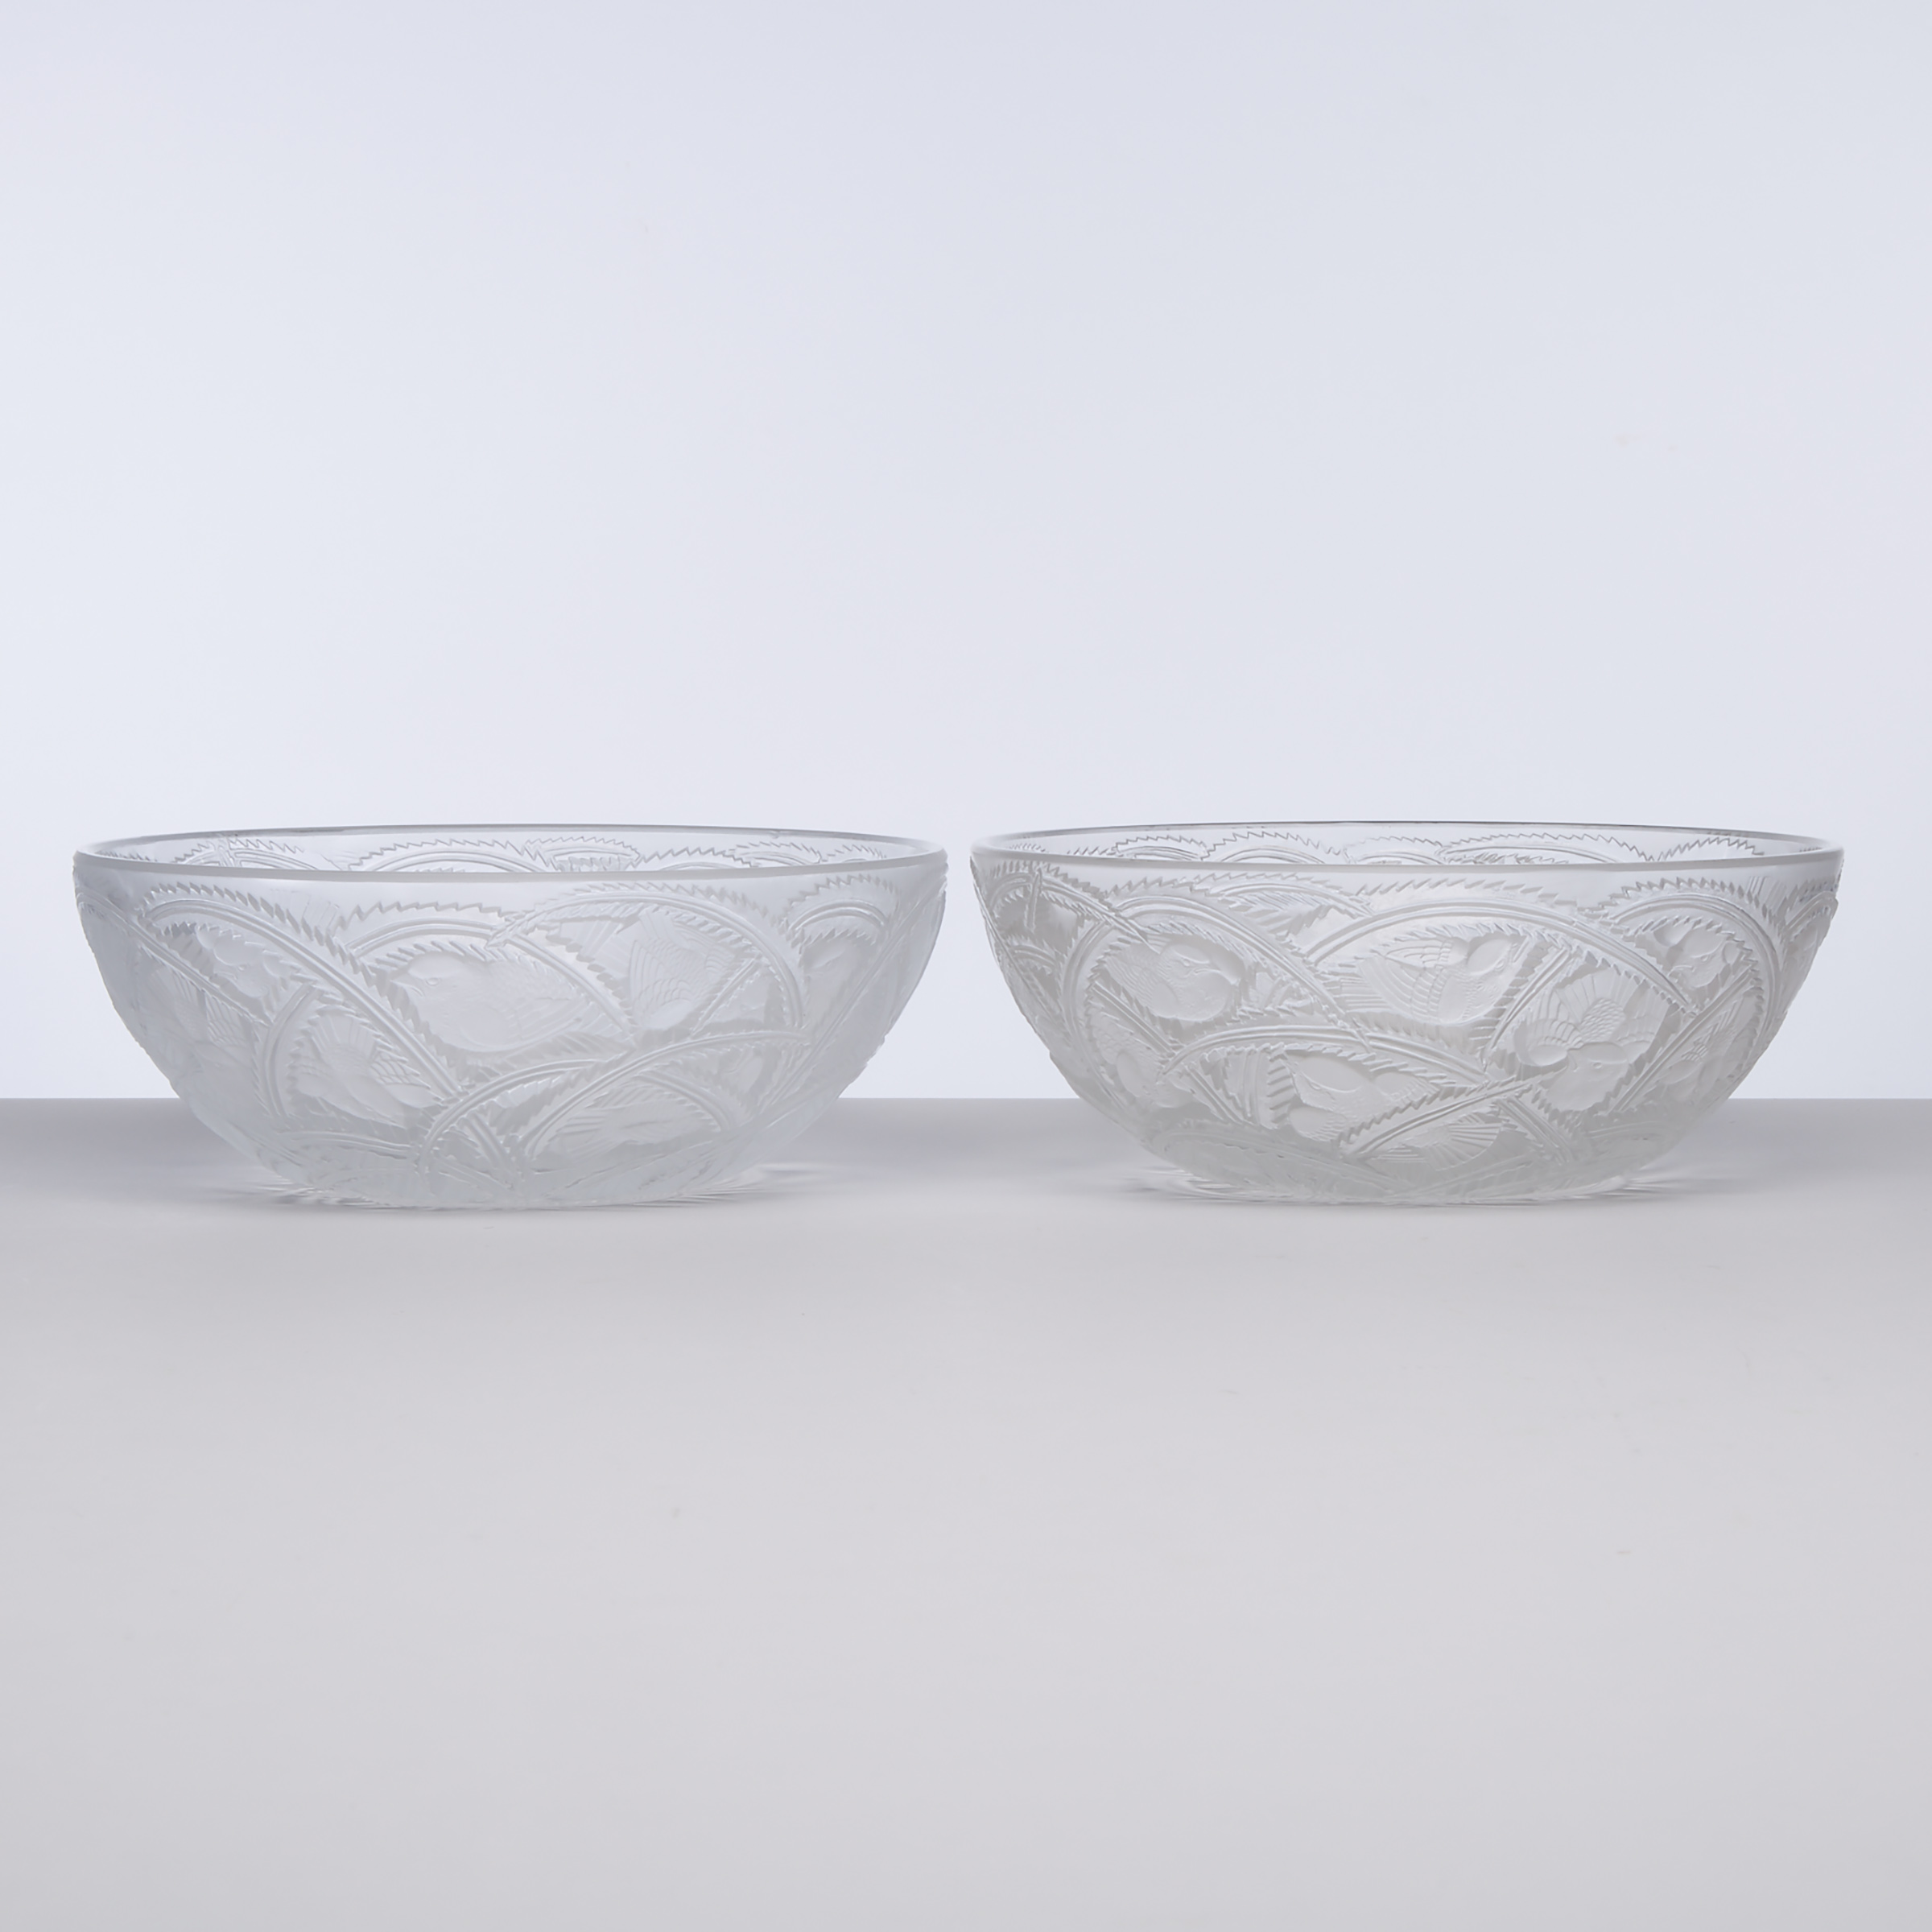 ‘Pinsons’, Pair of Lalique Moulded and Partly Frosted Glass Bowls, post-1945